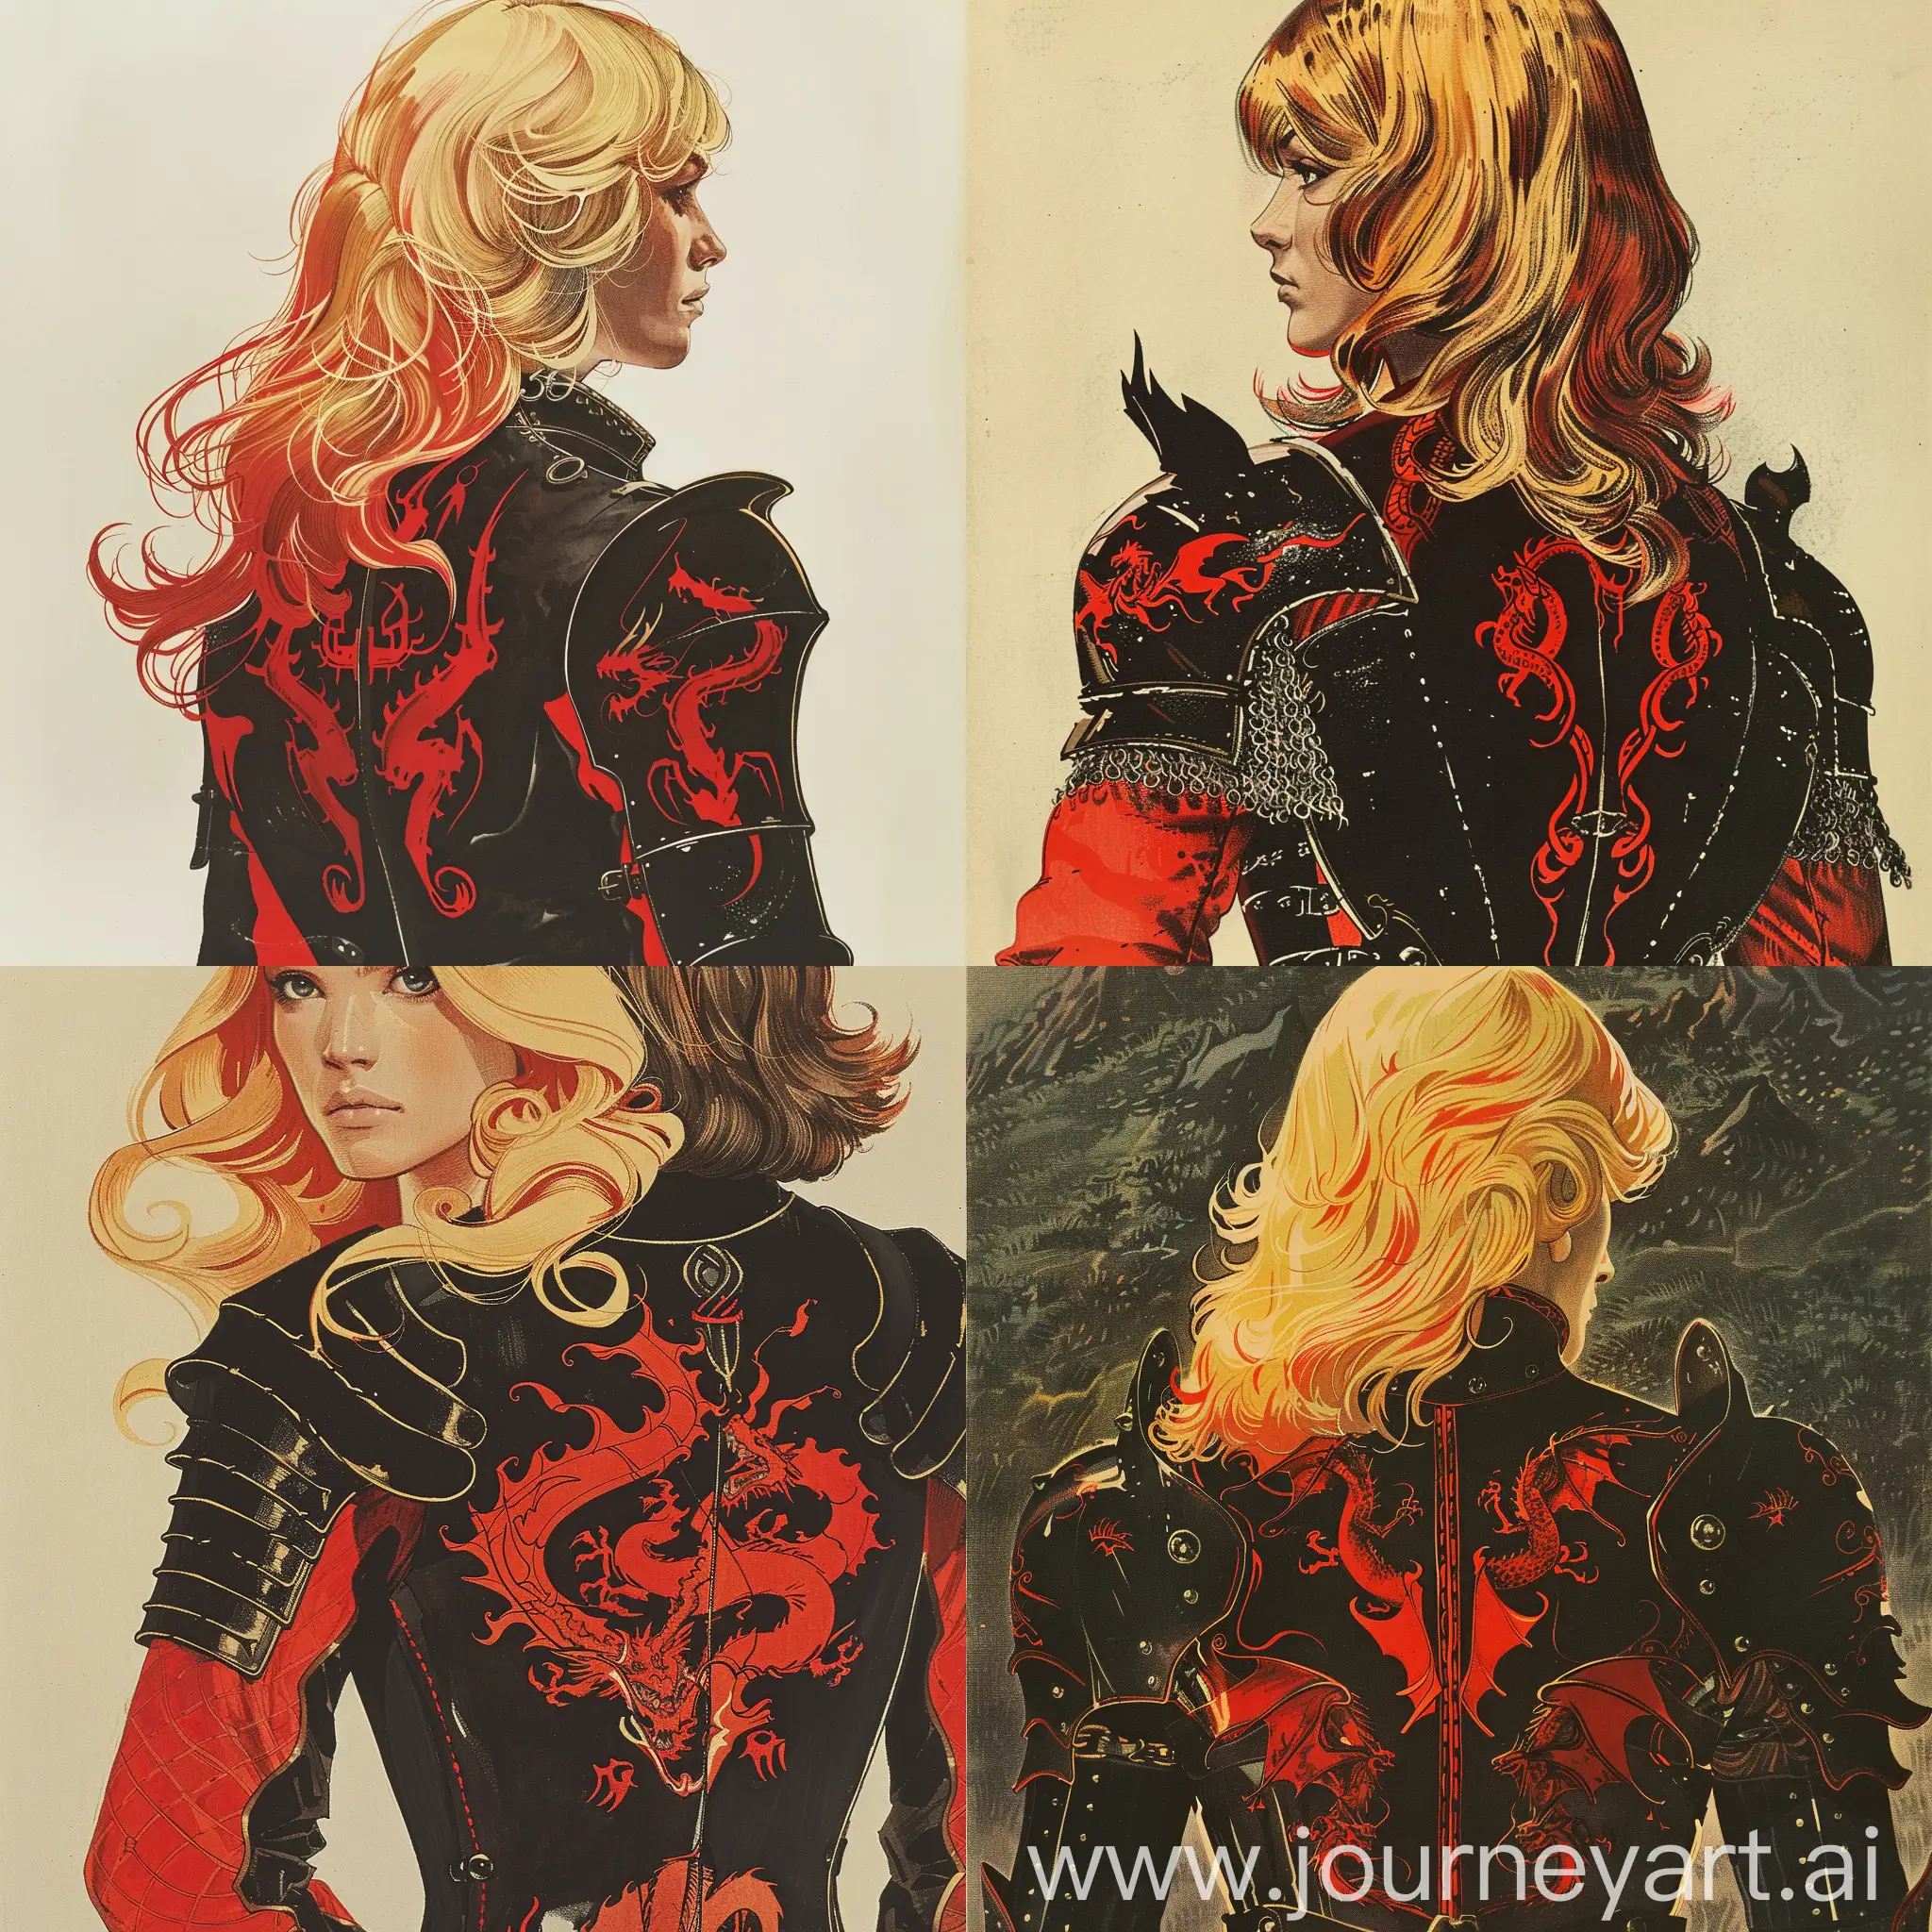 1970's art illustration from dark fantasy books (style). Art illustration of a woman with sun-blond hair, with red highlights. His armor is black with red designs illustrating dragons. Book illustration from 1970, such as illustrations from J.R.R. Tolkien's Lord of the Rings books.